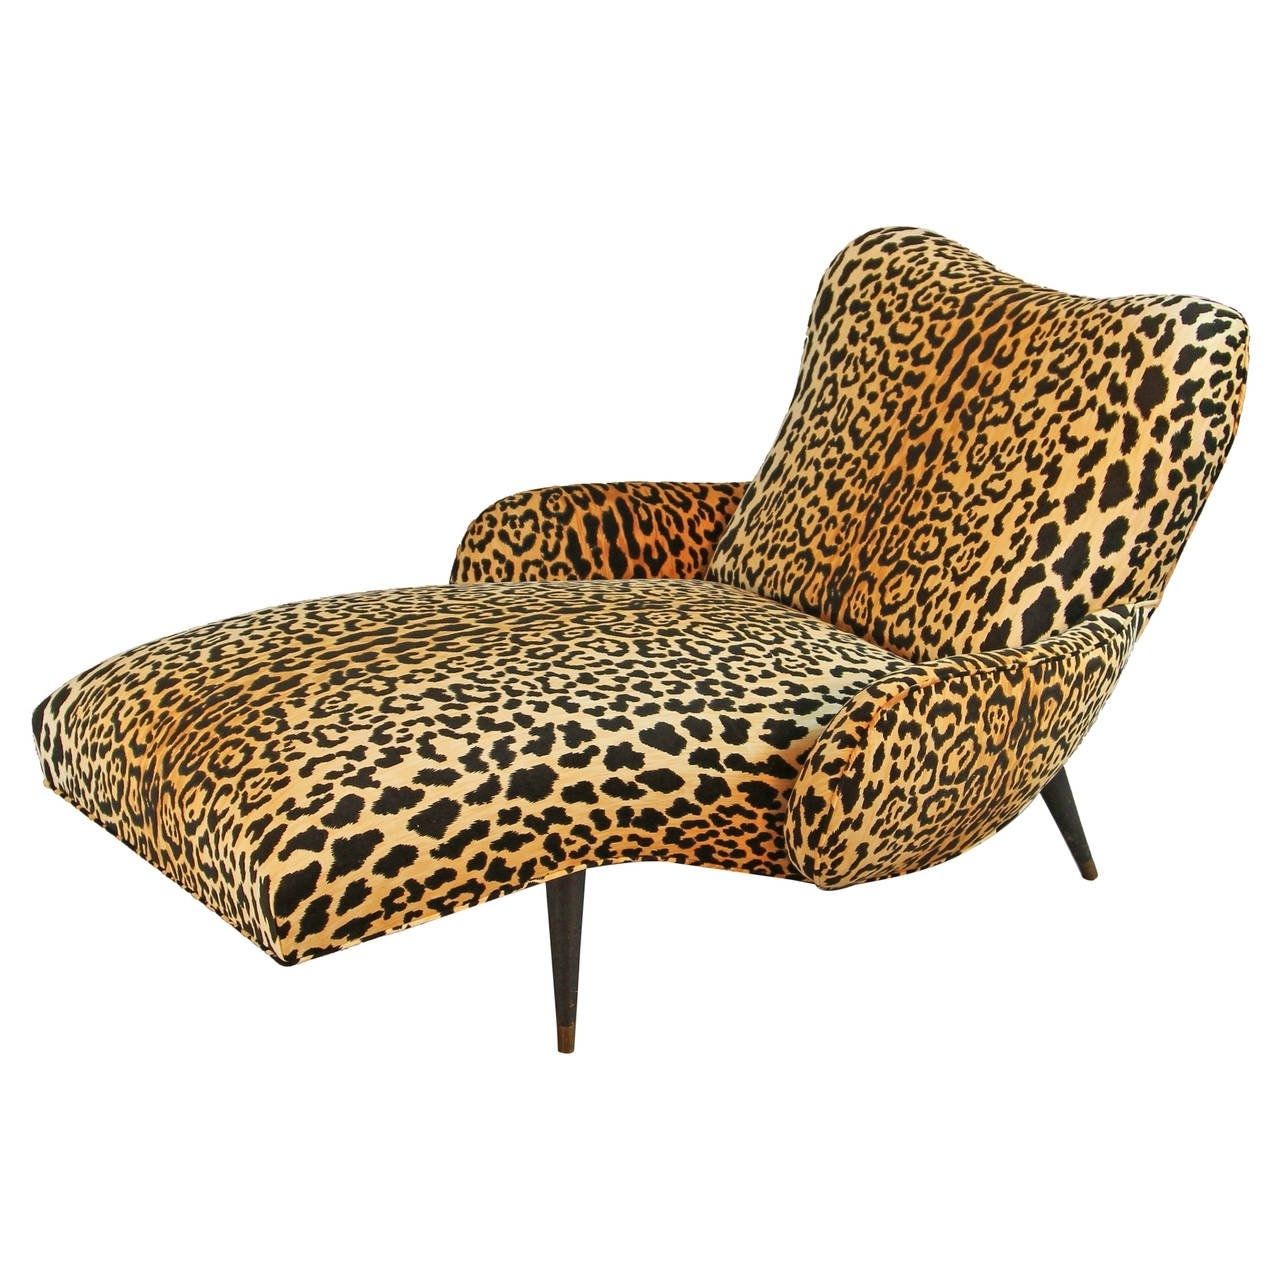 Leopard Chaises With Popular Mid Century Leopard Print Velvet Chaise Longue At 1stdibs (View 2 of 15)